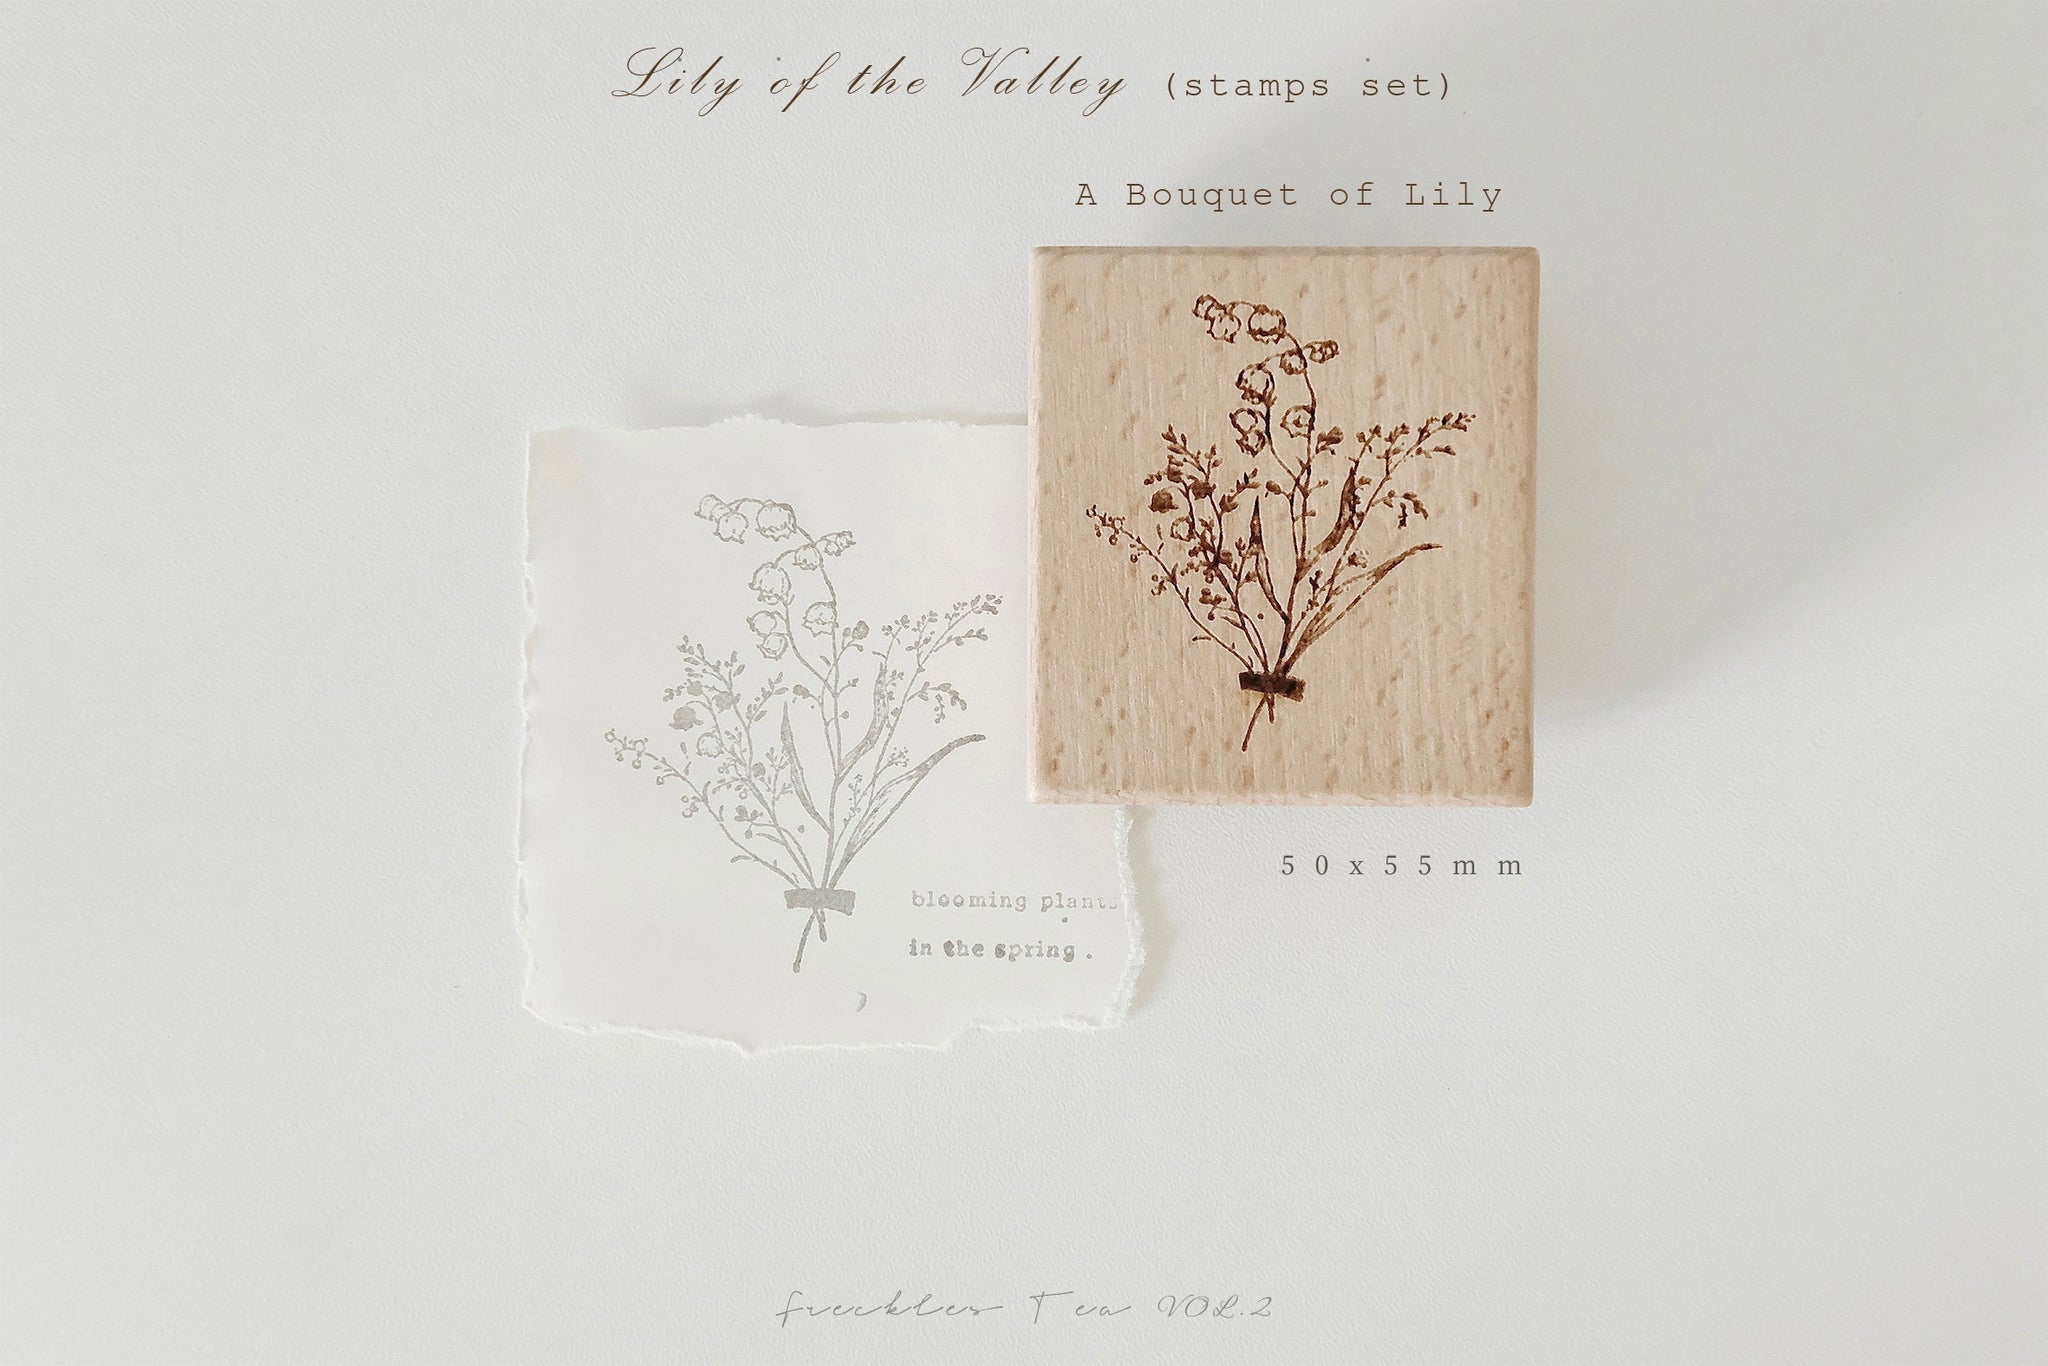 Freckles Tea Stamps Set: Lily of the Valley